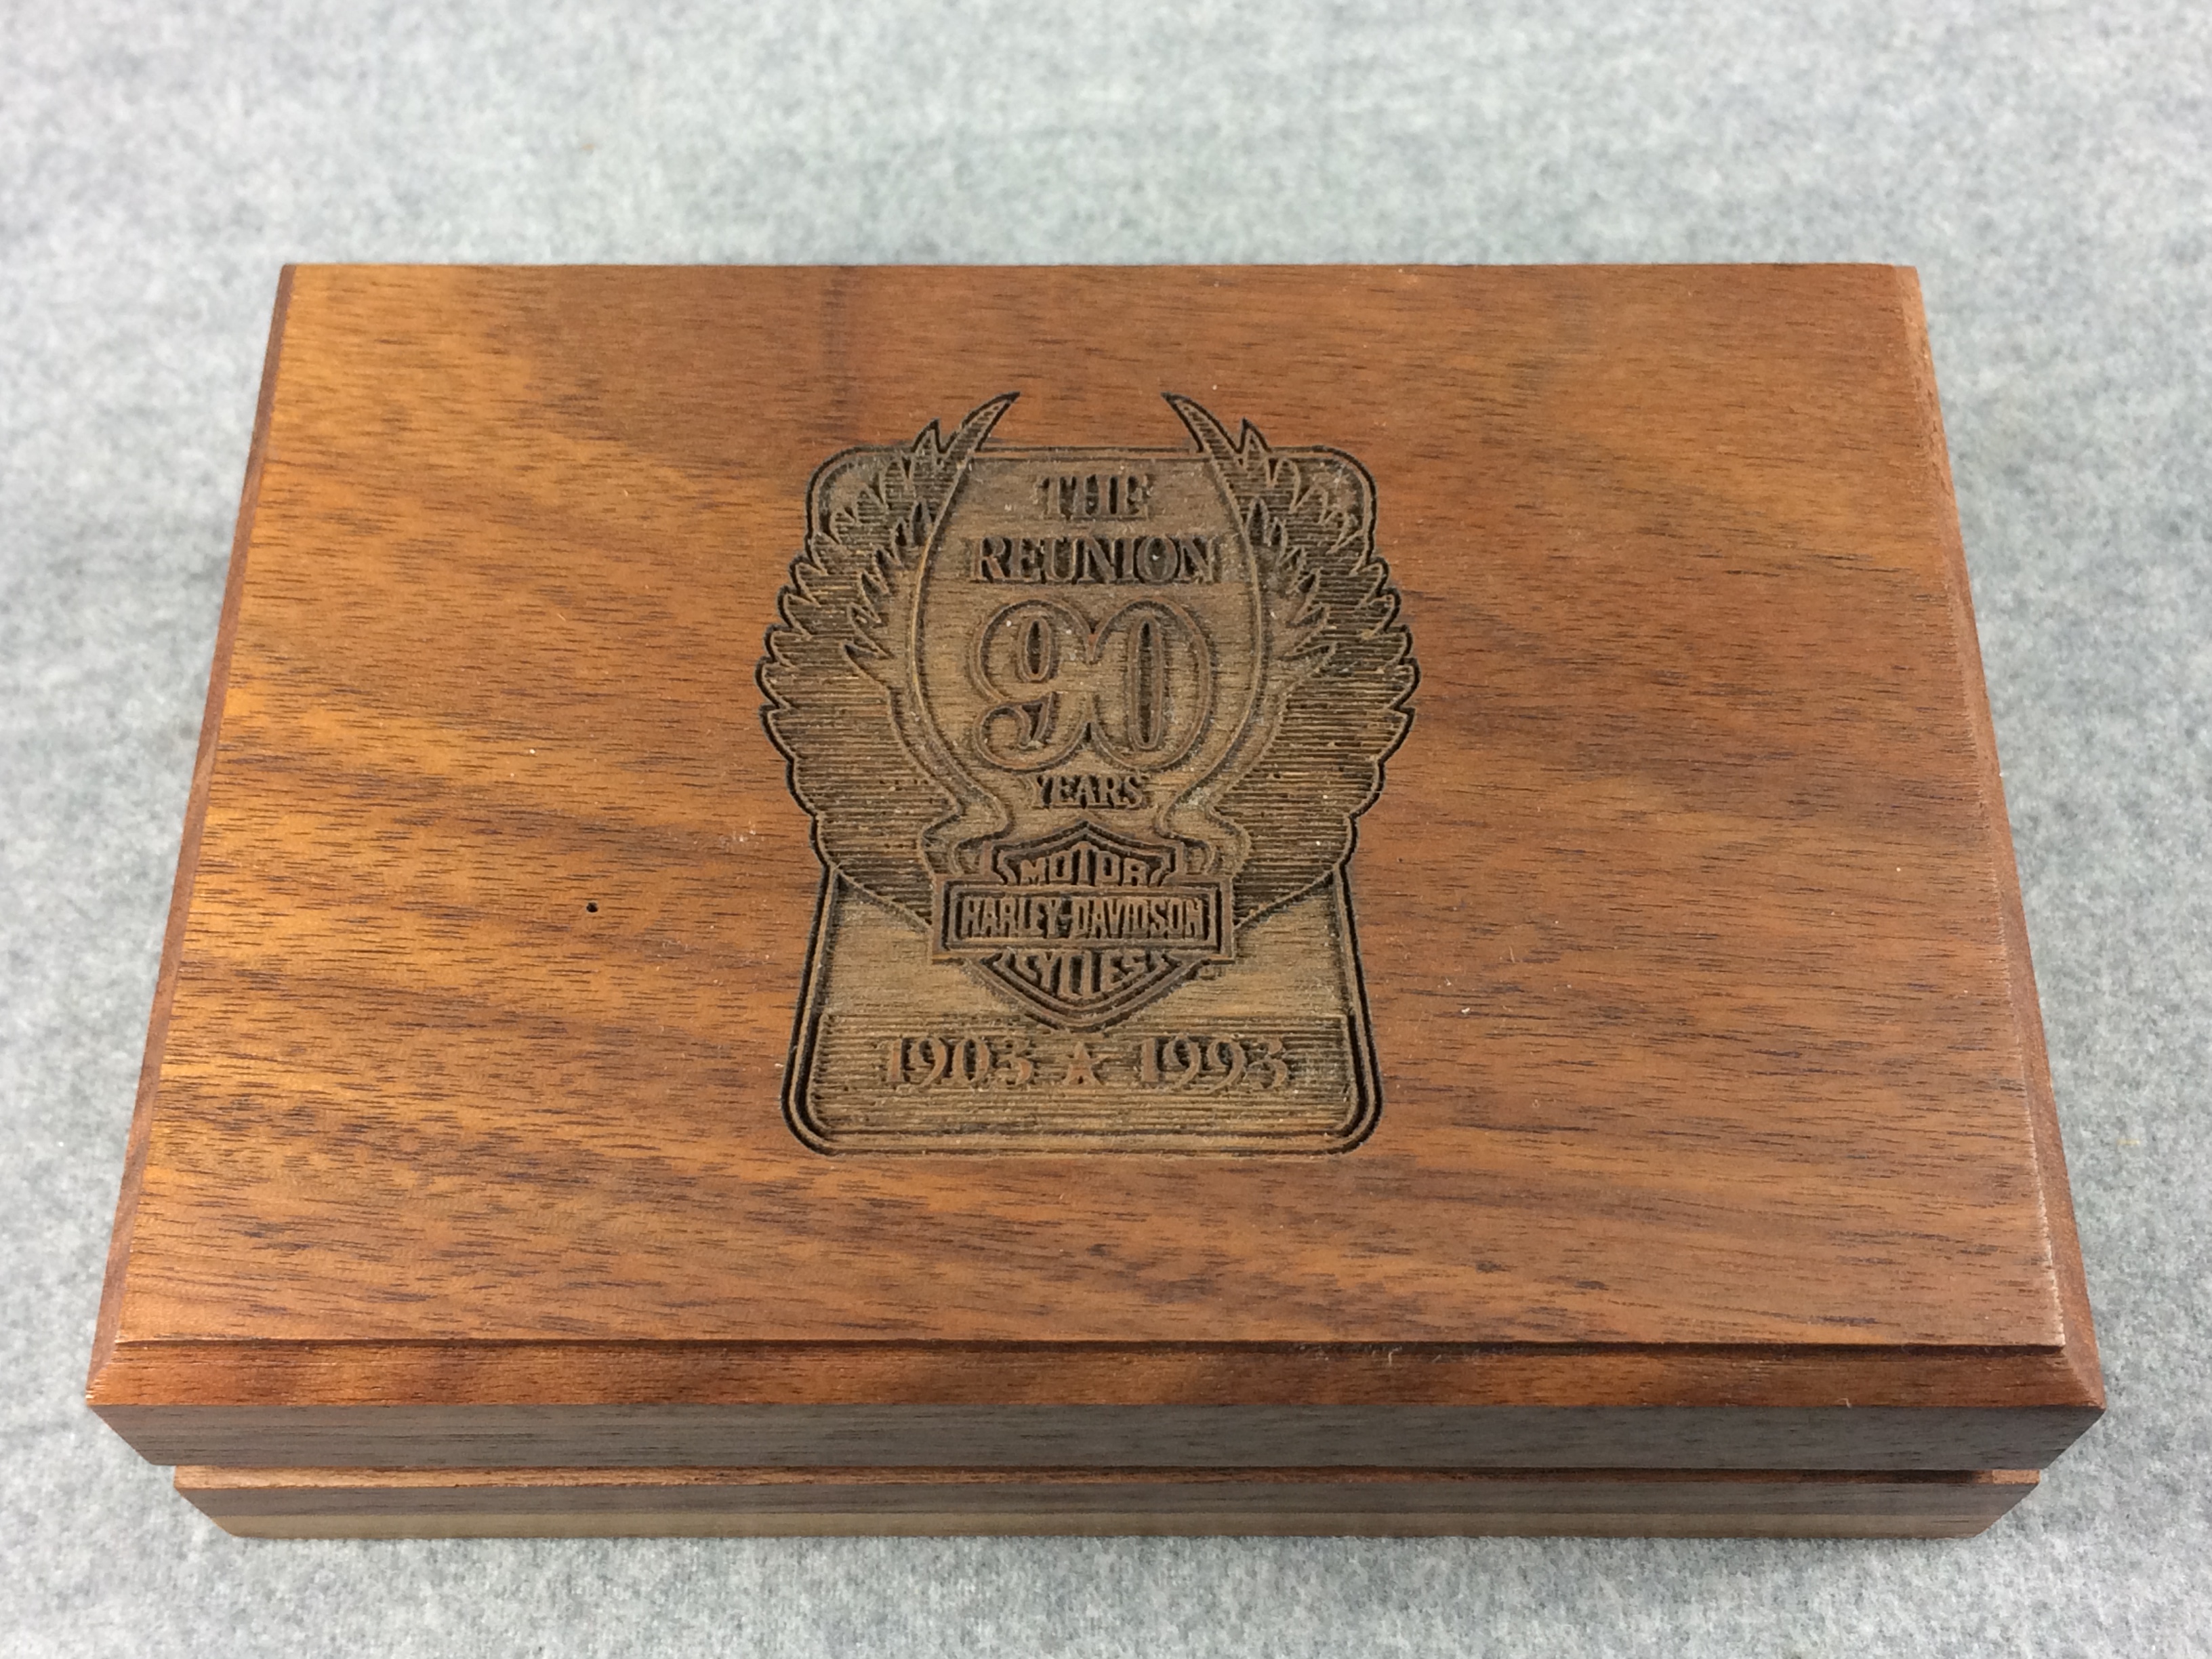 Value of HARLEY DAVIDSON REUNION 90 YEARS Silver Plate Lighter in Wood ...